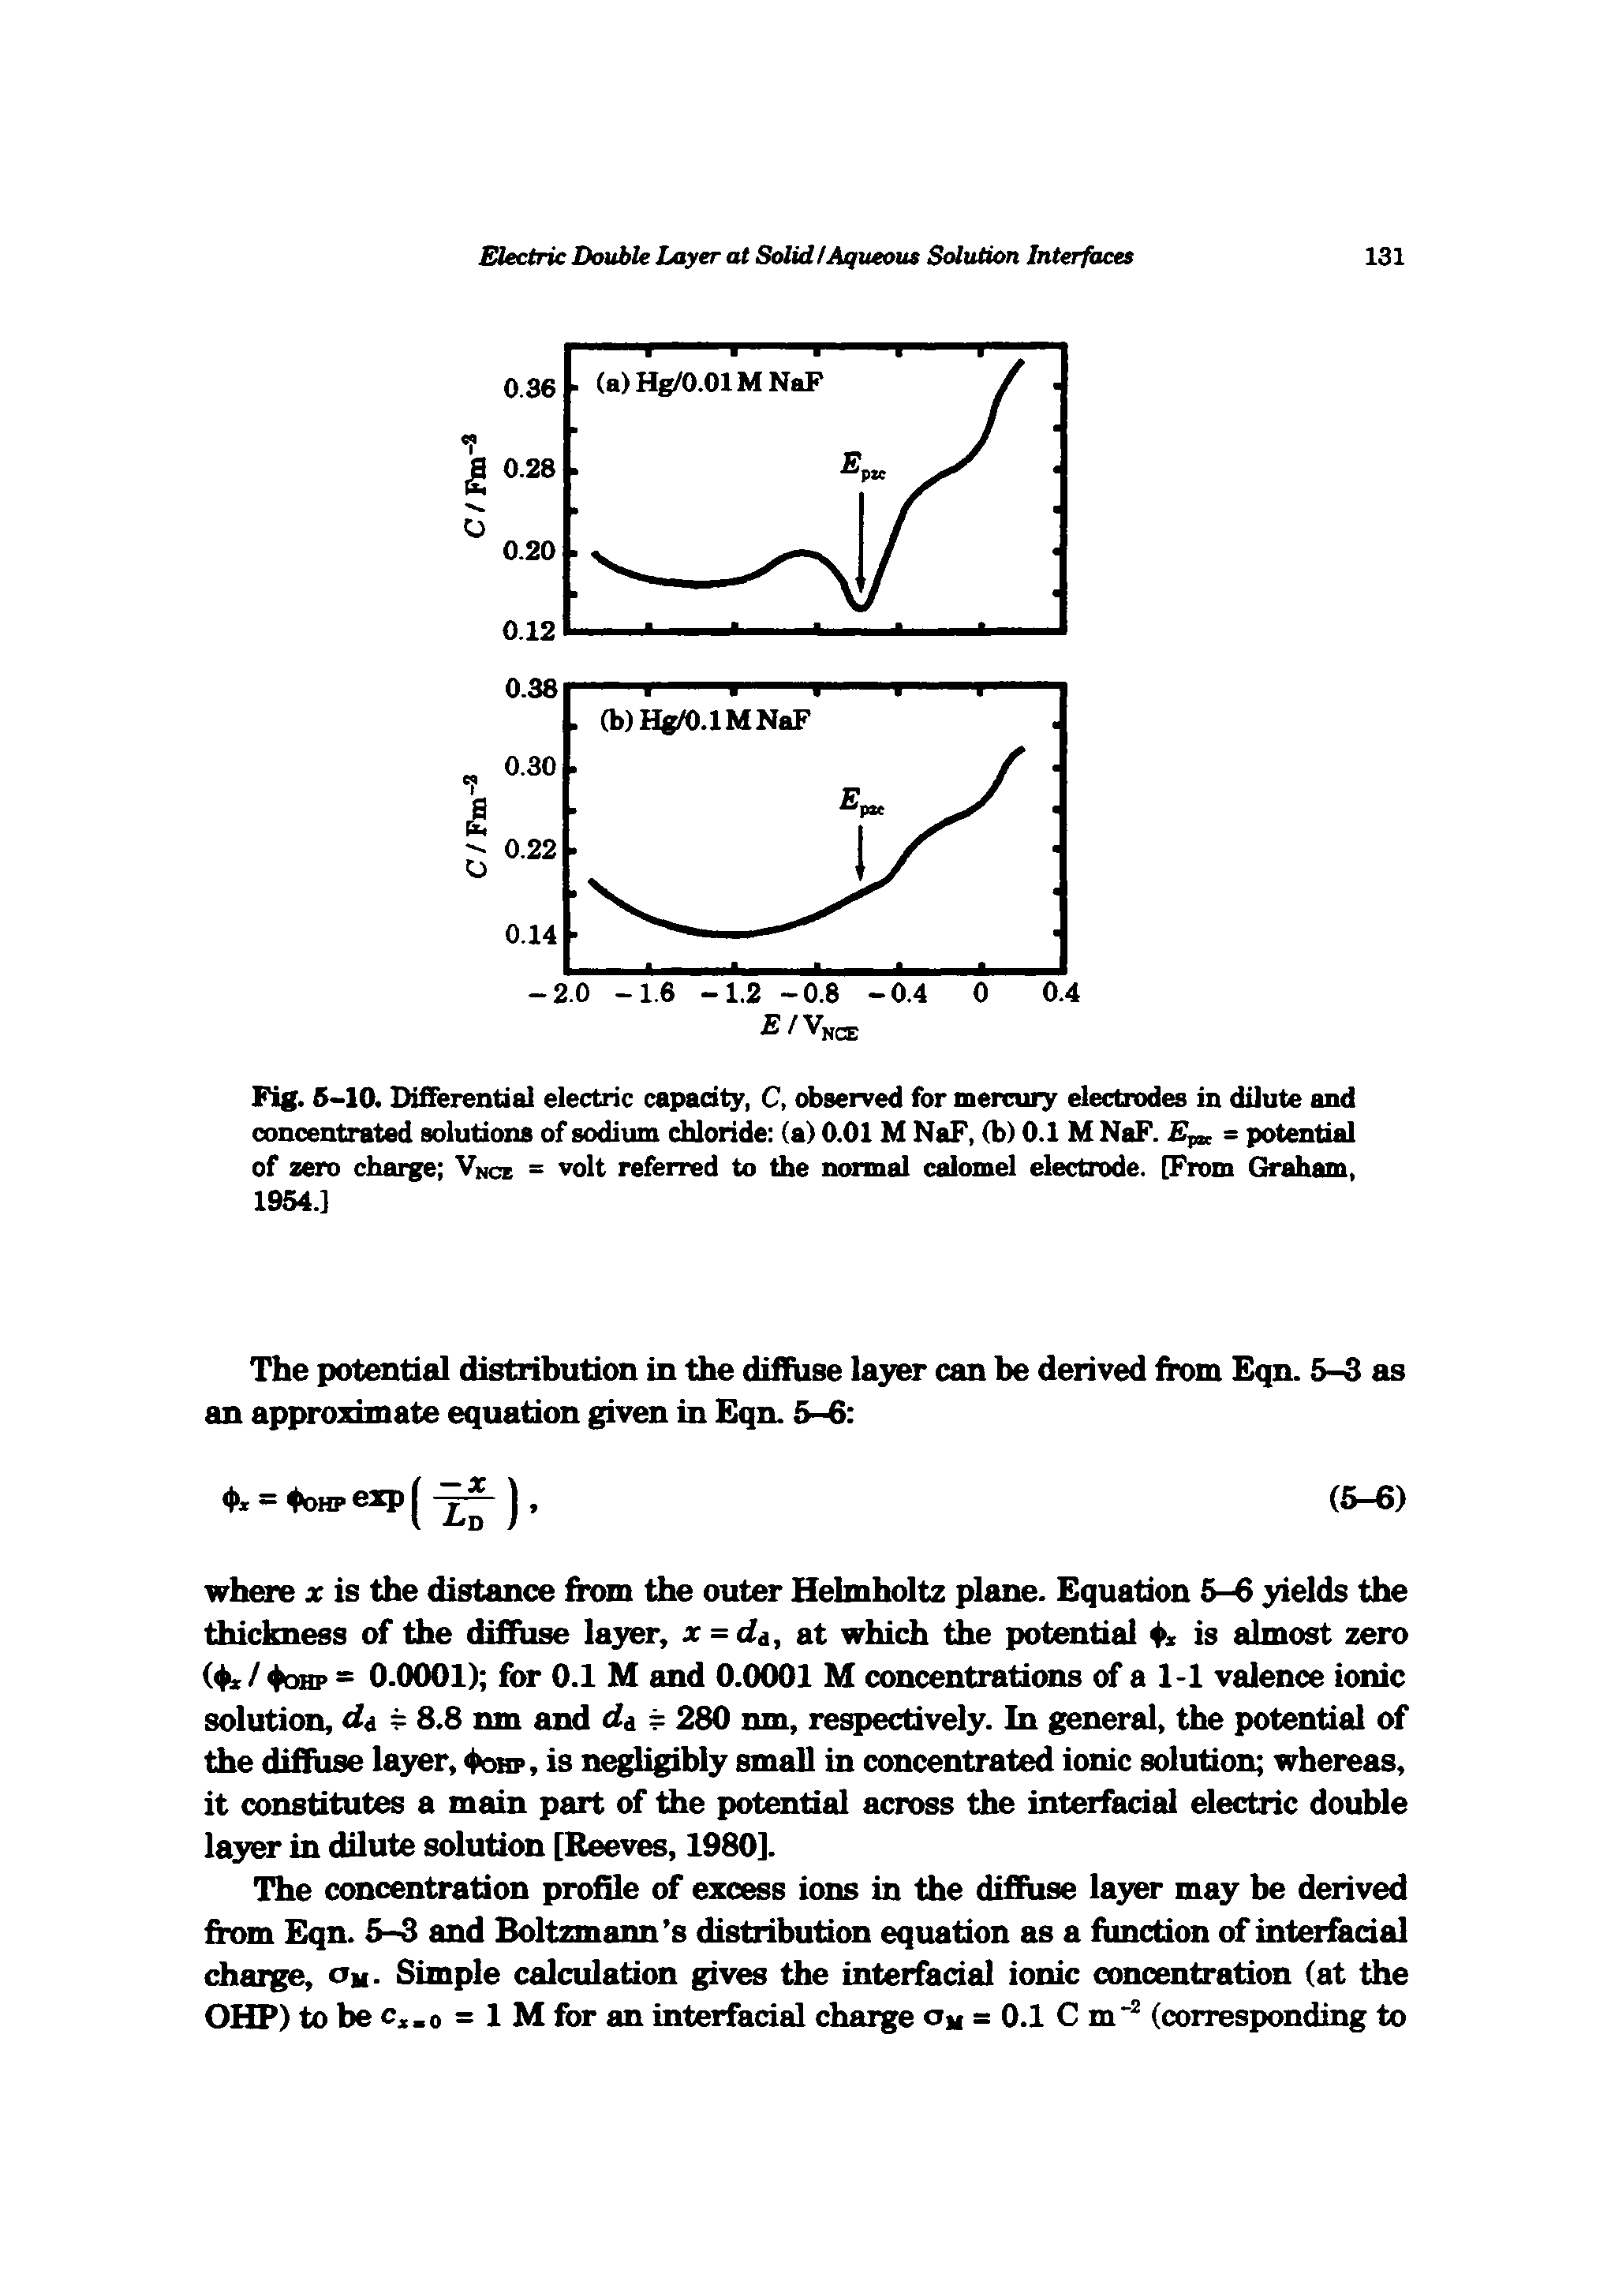 Fig. 6-10. Differential electric capacity, C, observed for mercury electrodes in dilute and concentrated solutions of sodium chloride (a) 0.01 M NaF, (b) 0.1 M NaF. = potential of zero charge Vnce = volt referred to the normal calomel electrode. [From Graham, 1954.]...